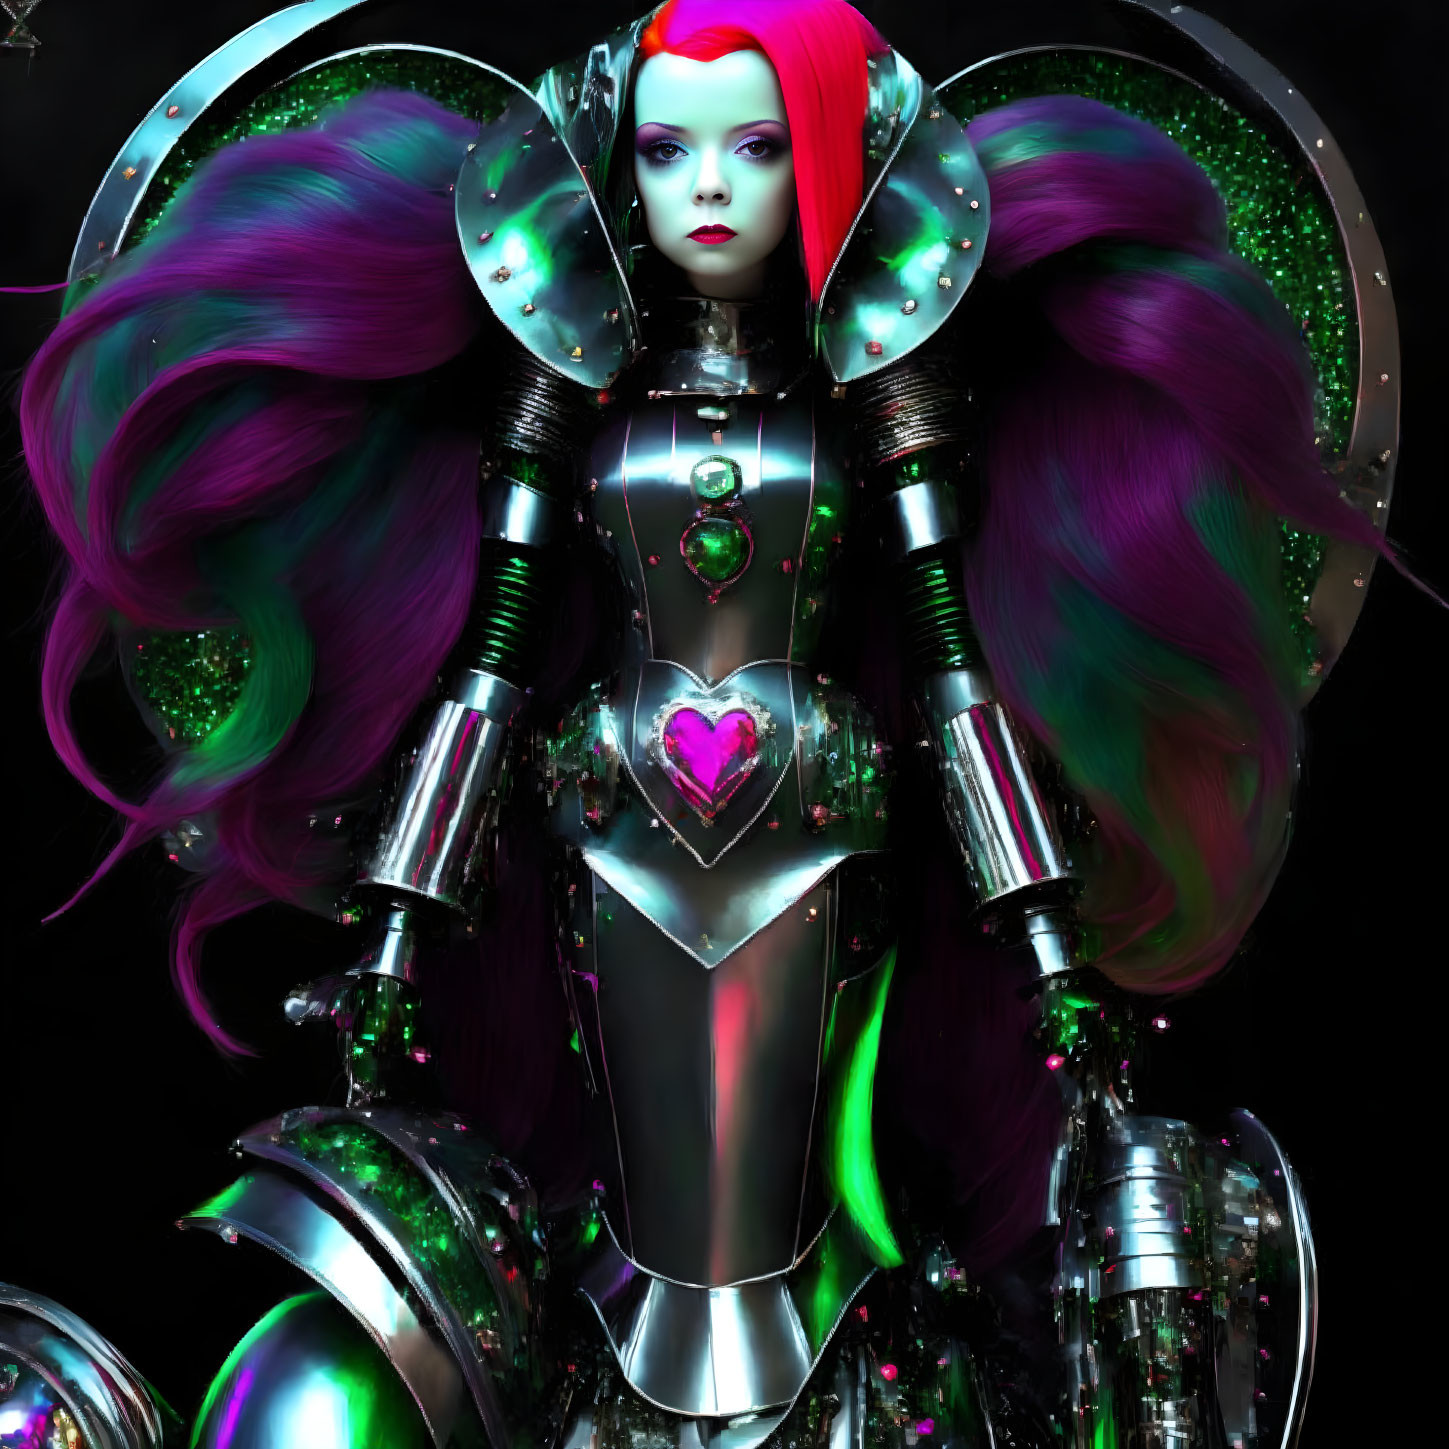 Futuristic female robot with purple and green hair and glowing neon accents